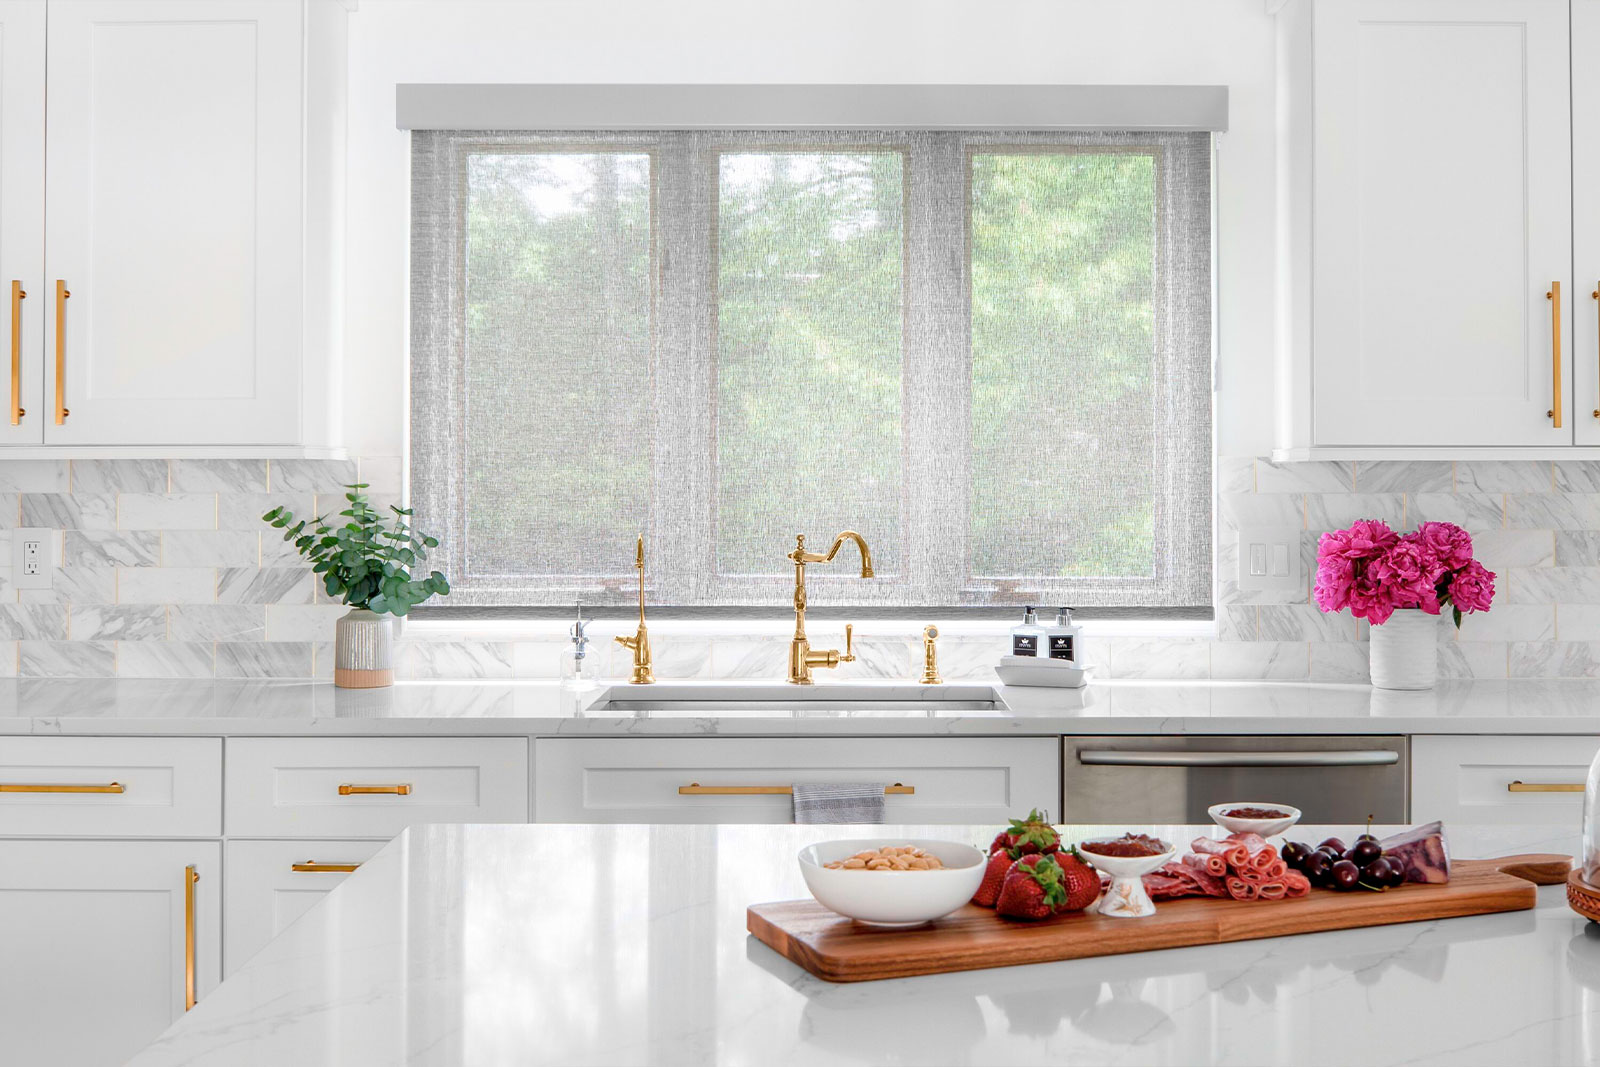 A large solar shade covers three windows above a modern kitchen sink, without blocking the veiw to outside.